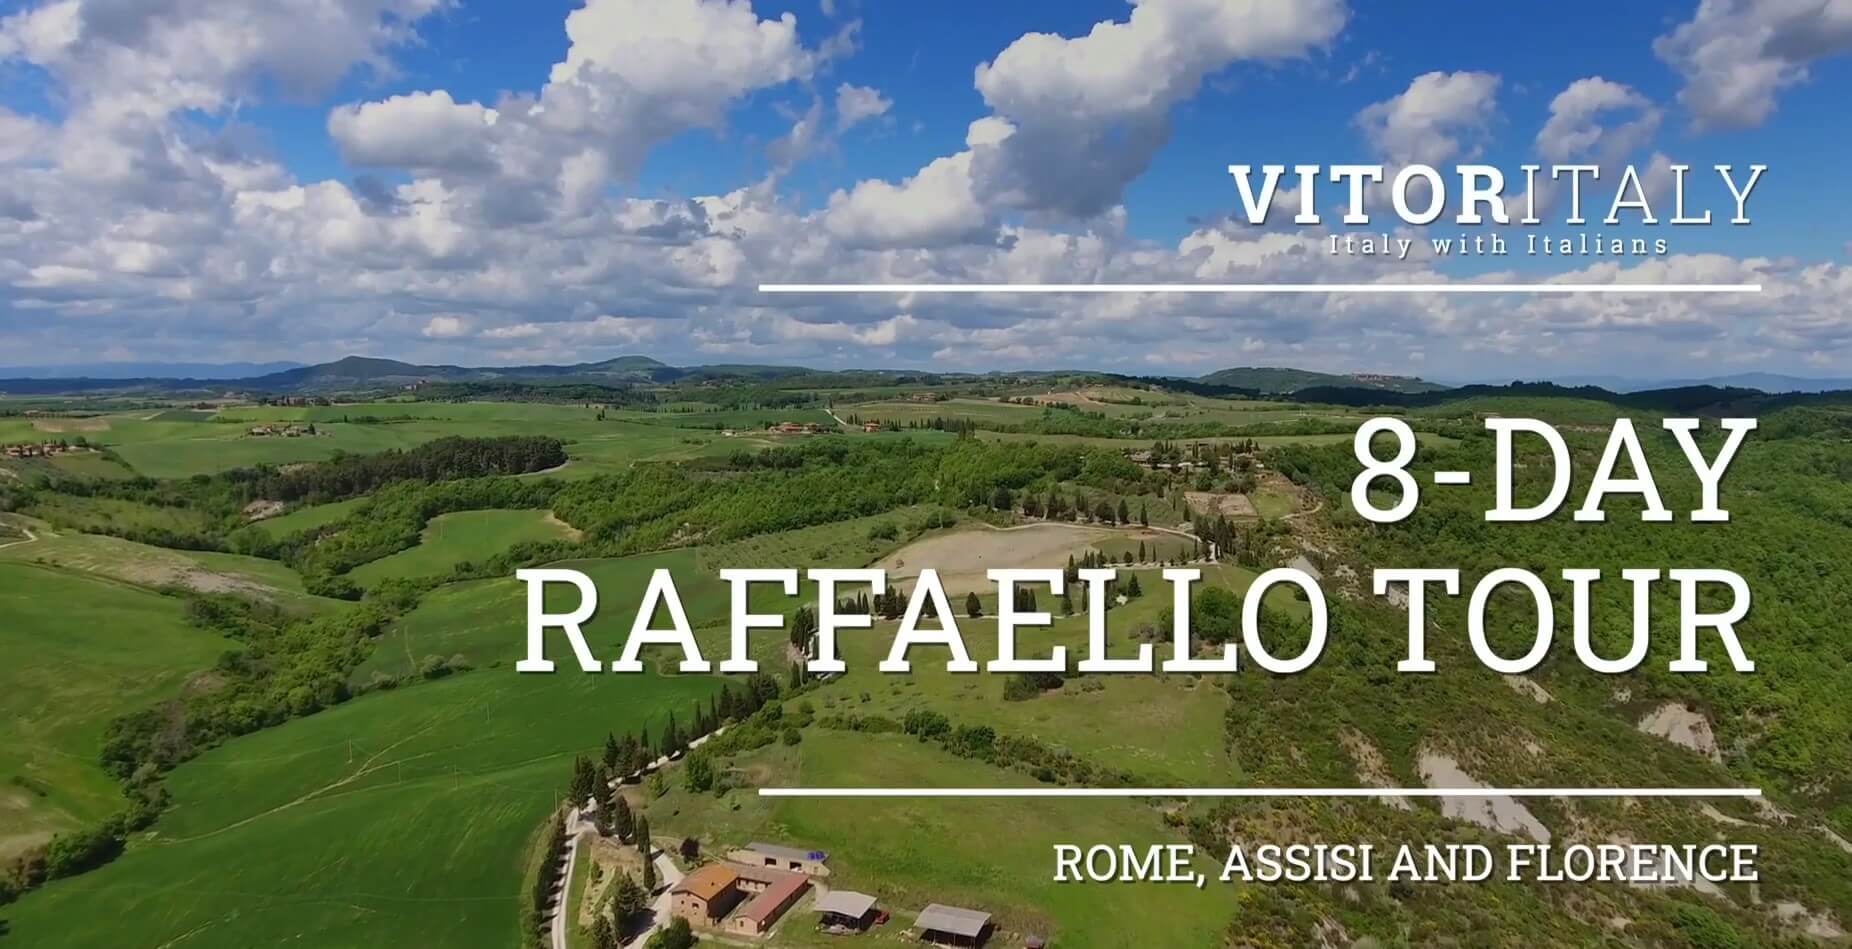 RAFFAELLO TOUR - Rome, Assisi and Florence in 8 days